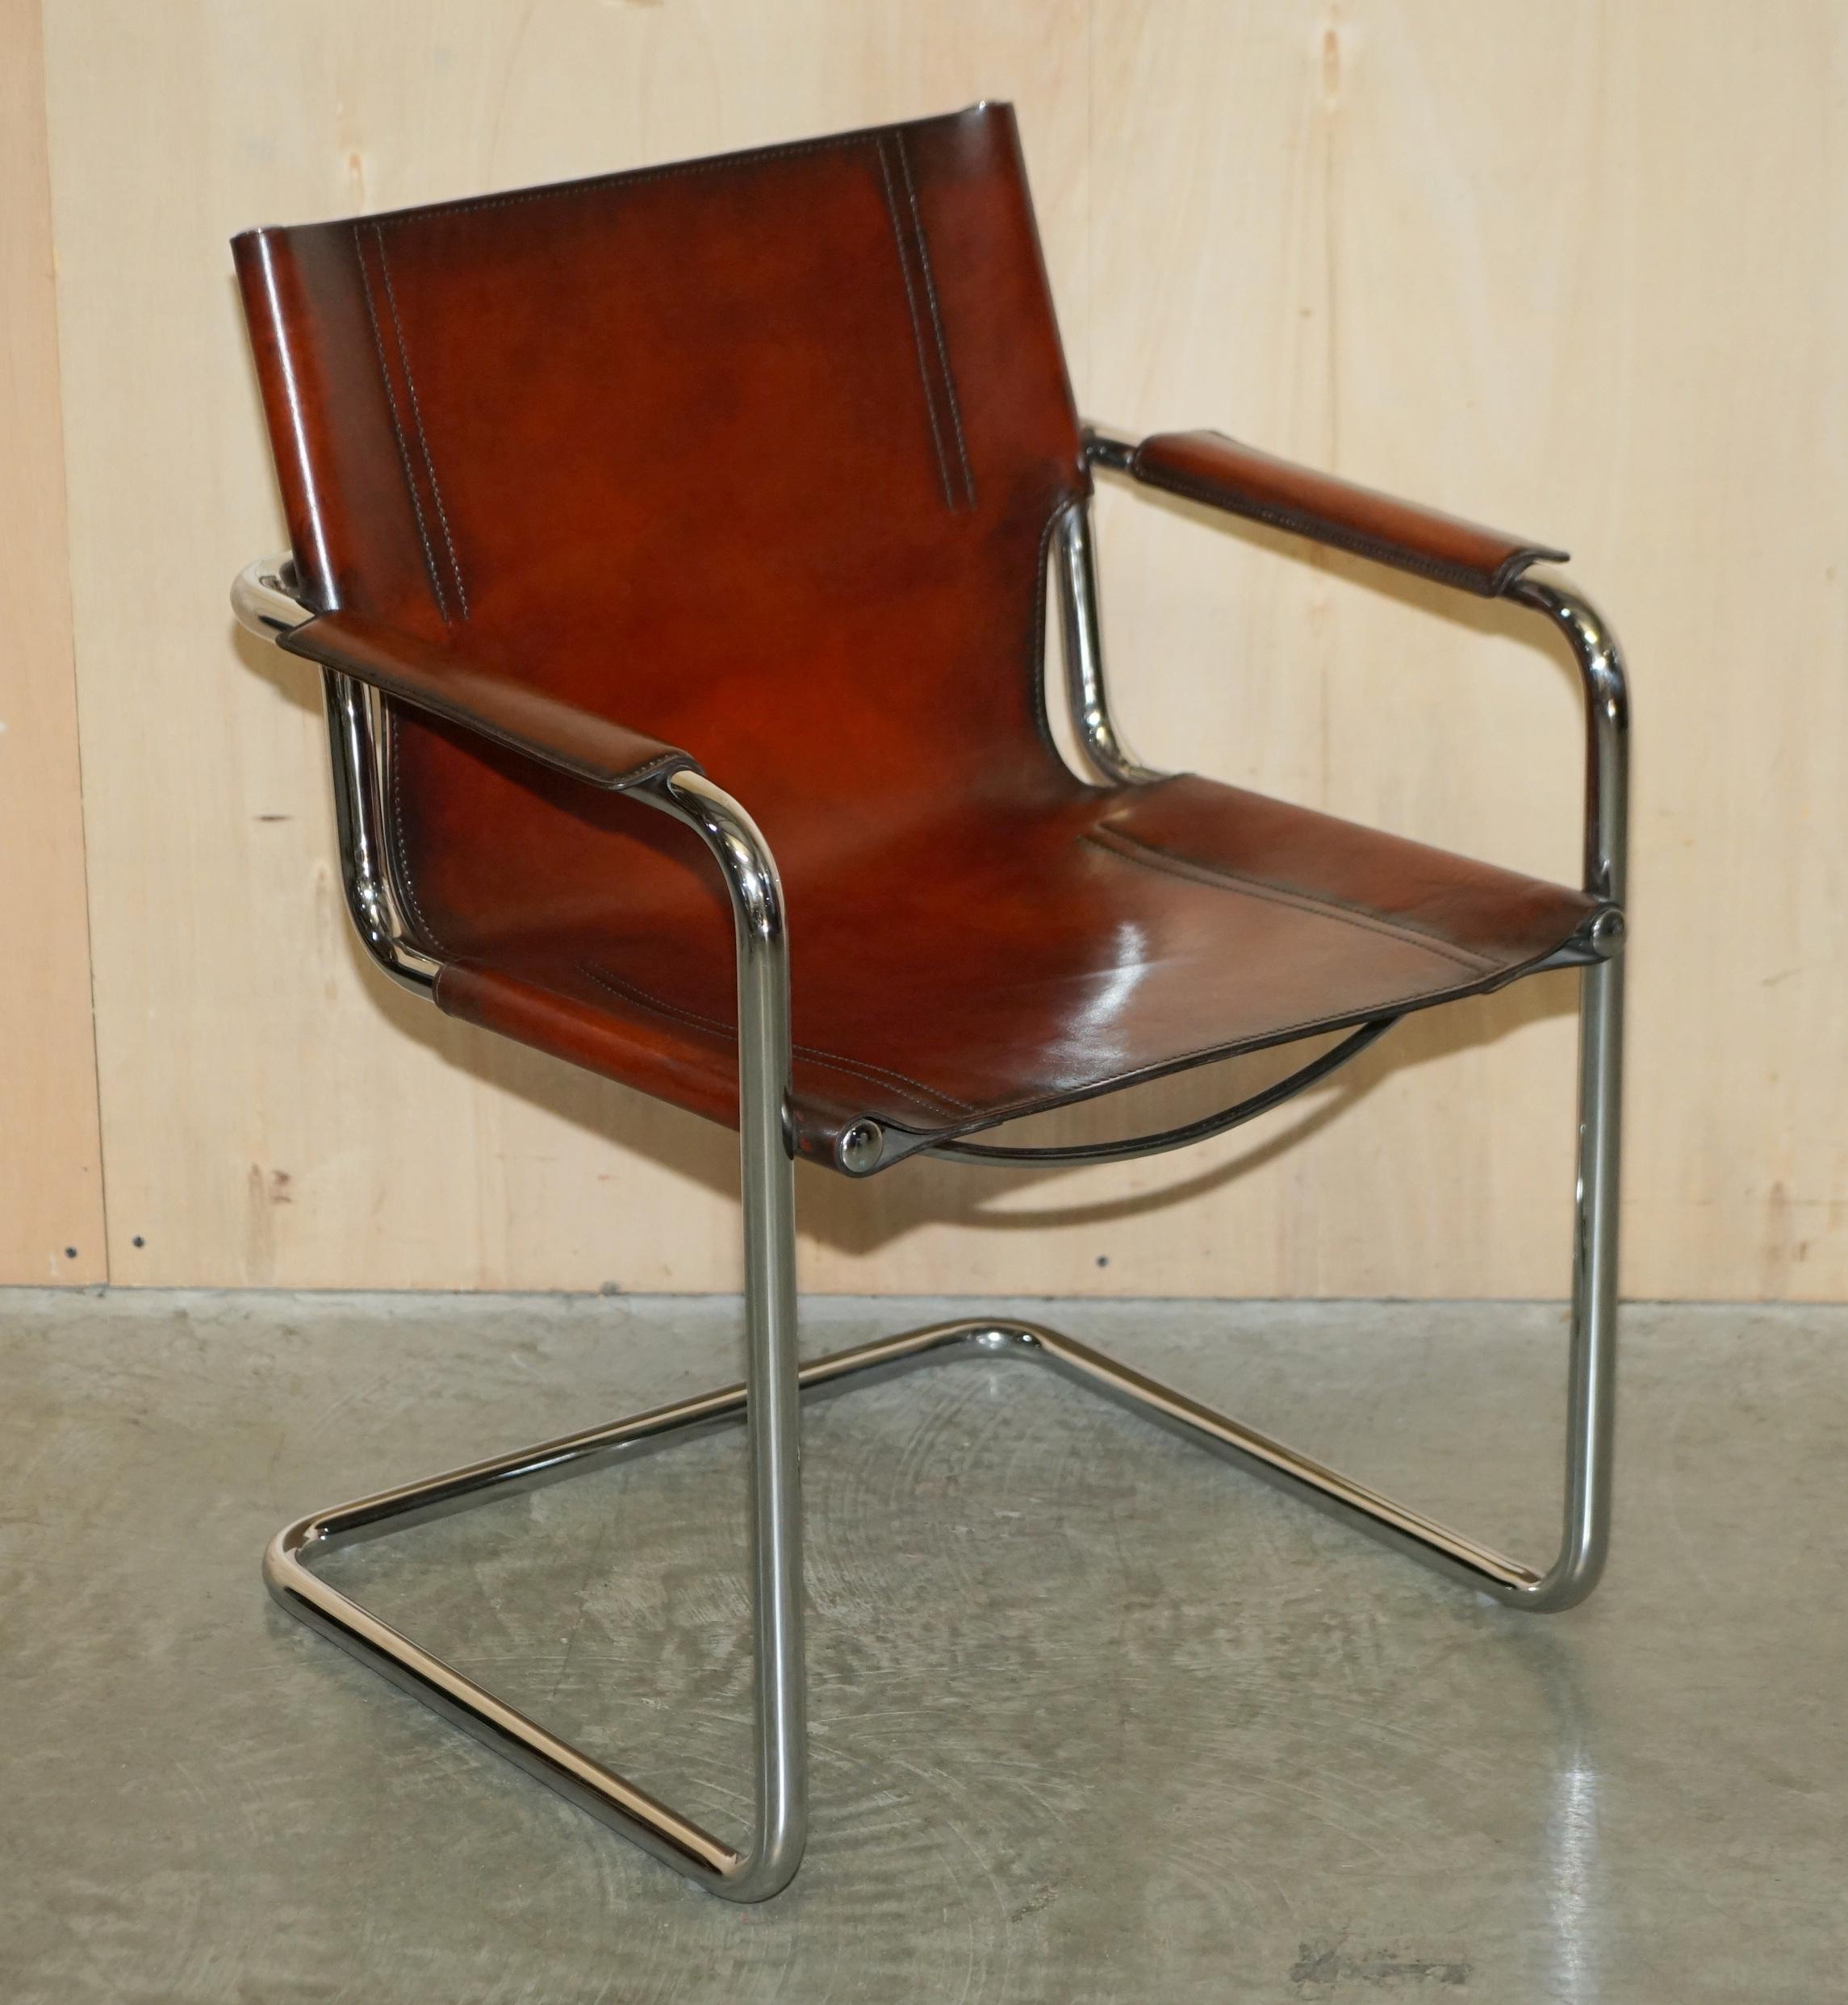 We are delighted to offer for sale this sublime suite of ten original fully stamped Matteo Grassi MG5 circa 1970 whisky brown leather armchairs designed by the genius that was Marcel Breuer

If you’re looking at this listing then the chances are you